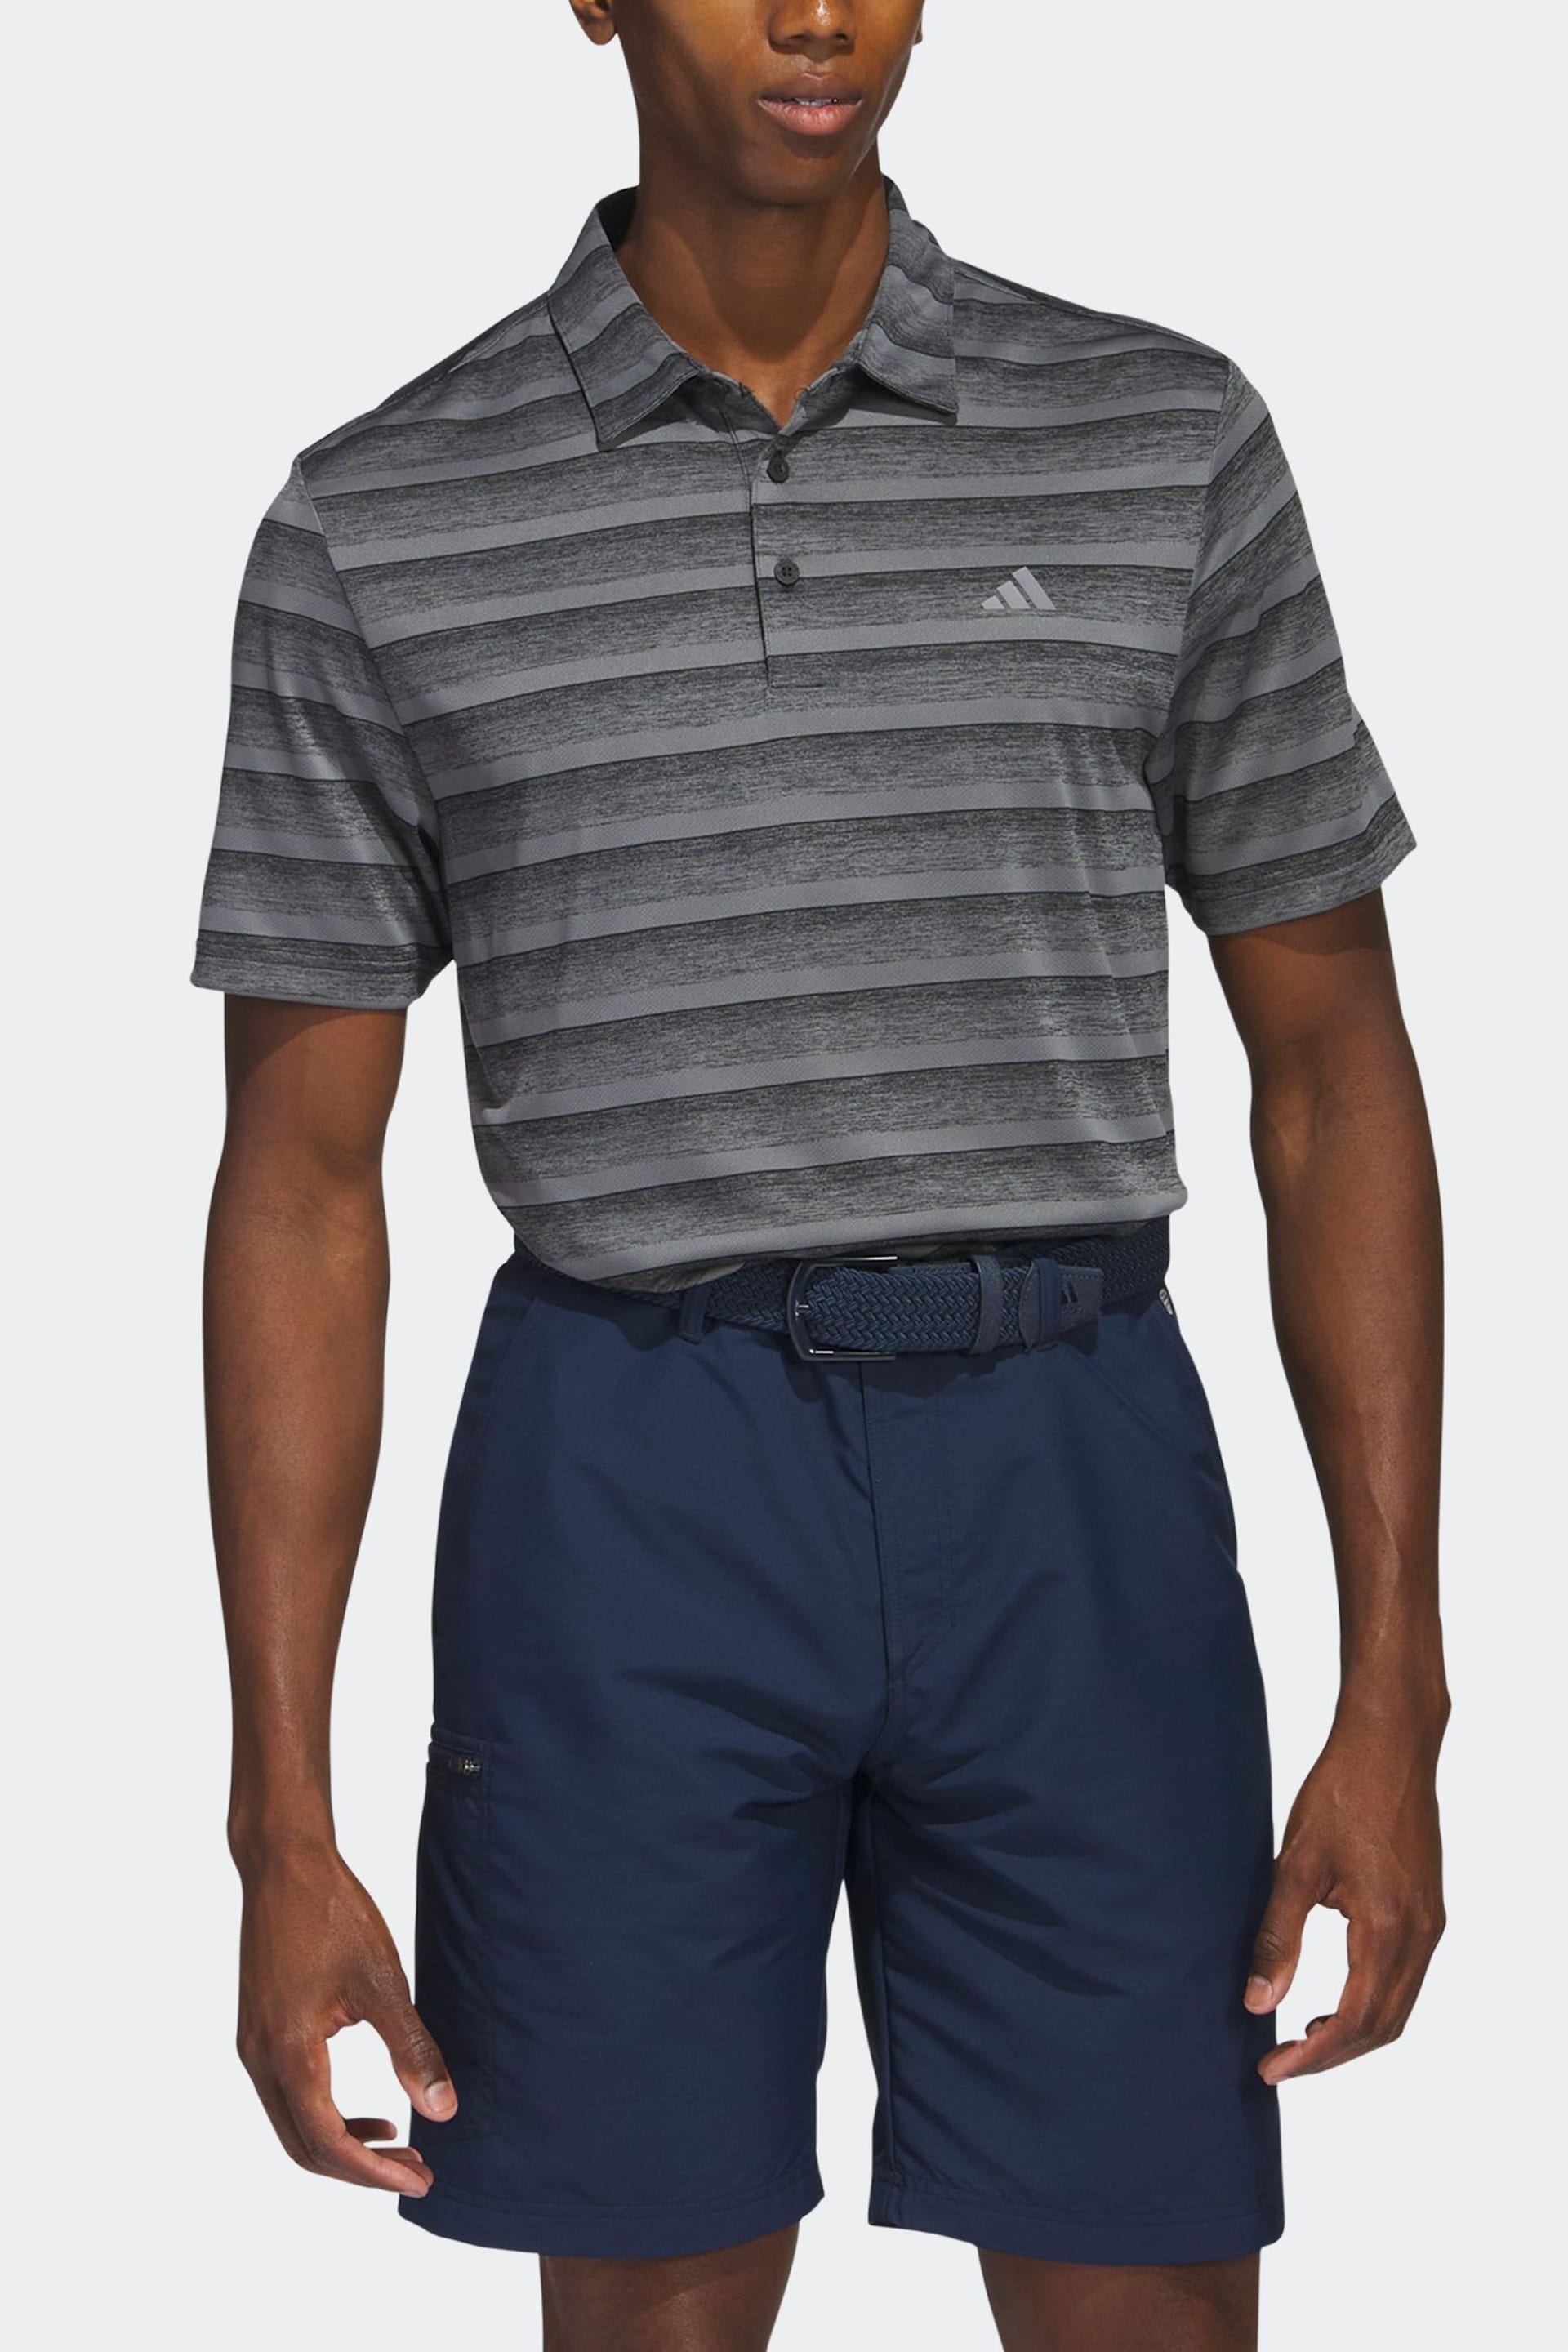 adidas Golf Two Colour Striped Polo Shirt - Image 1 of 5